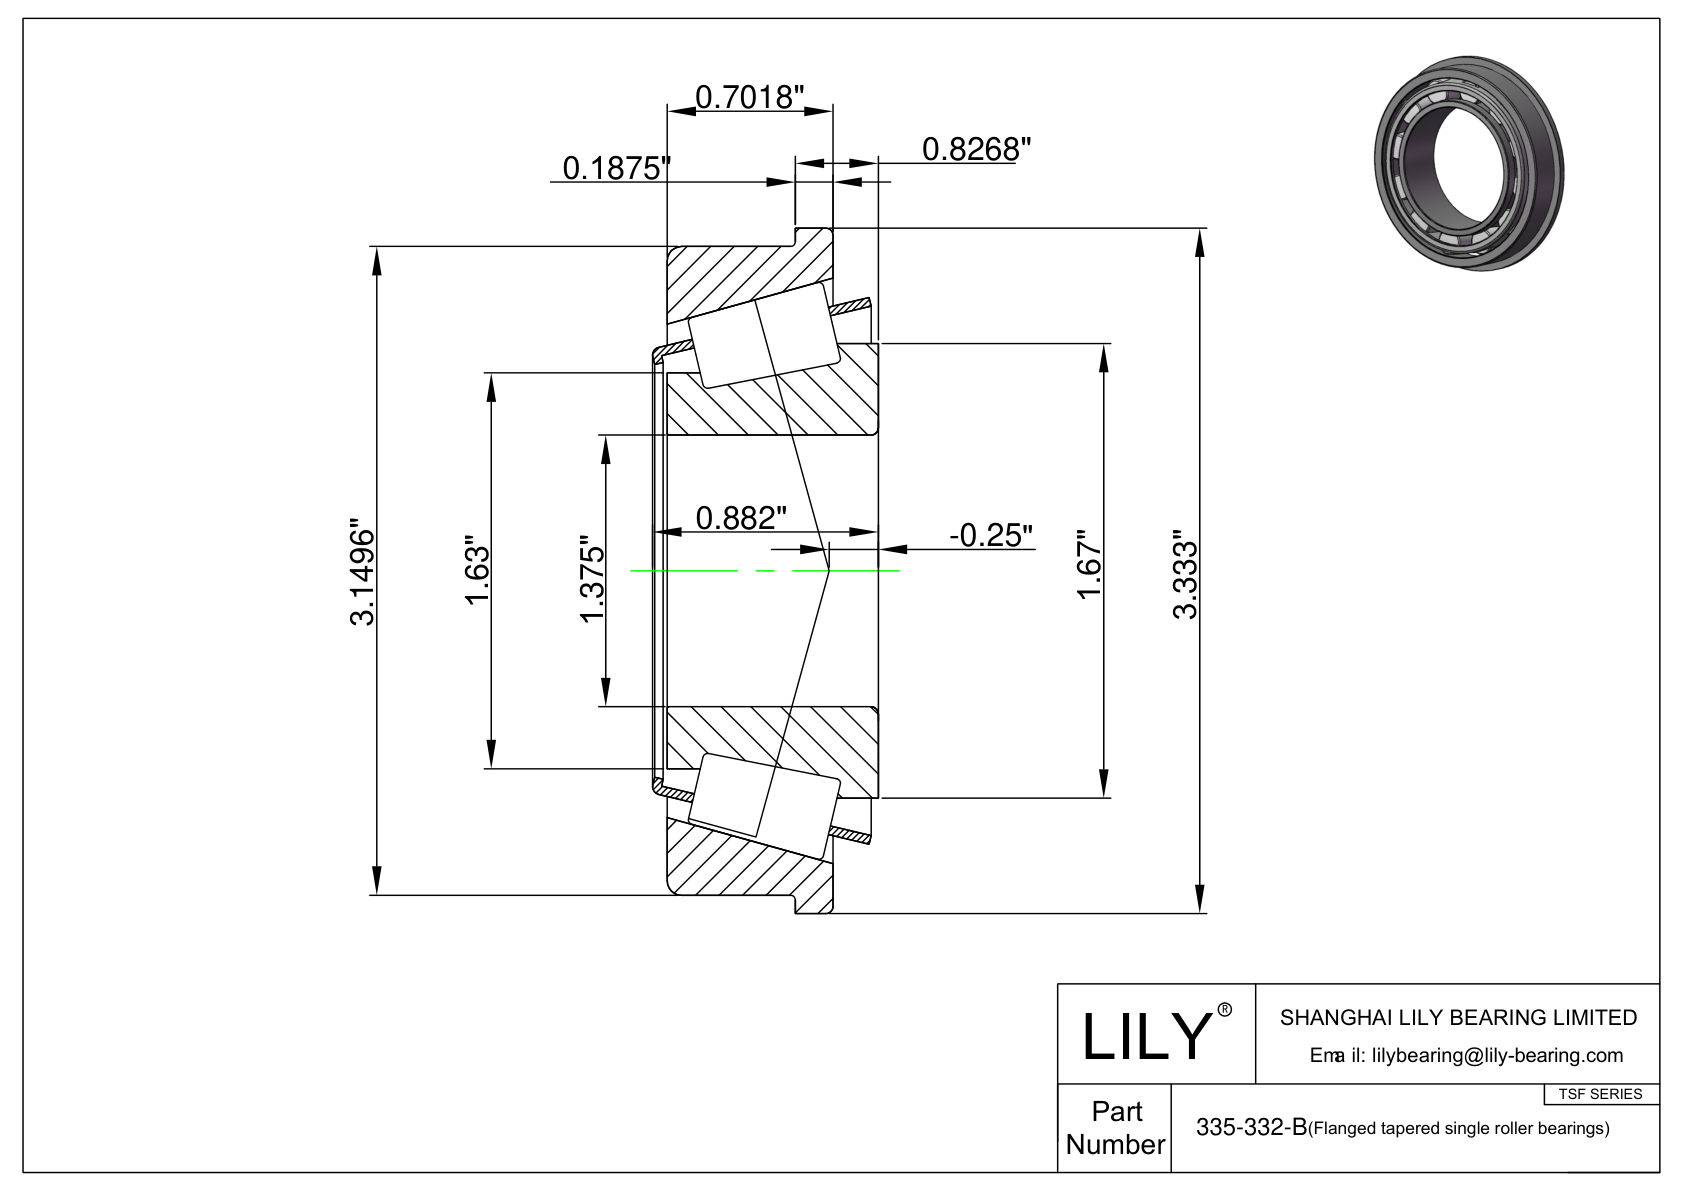 31594-31520-B TSF (Tapered Single Roller Bearings with Flange) (Imperial) cad drawing